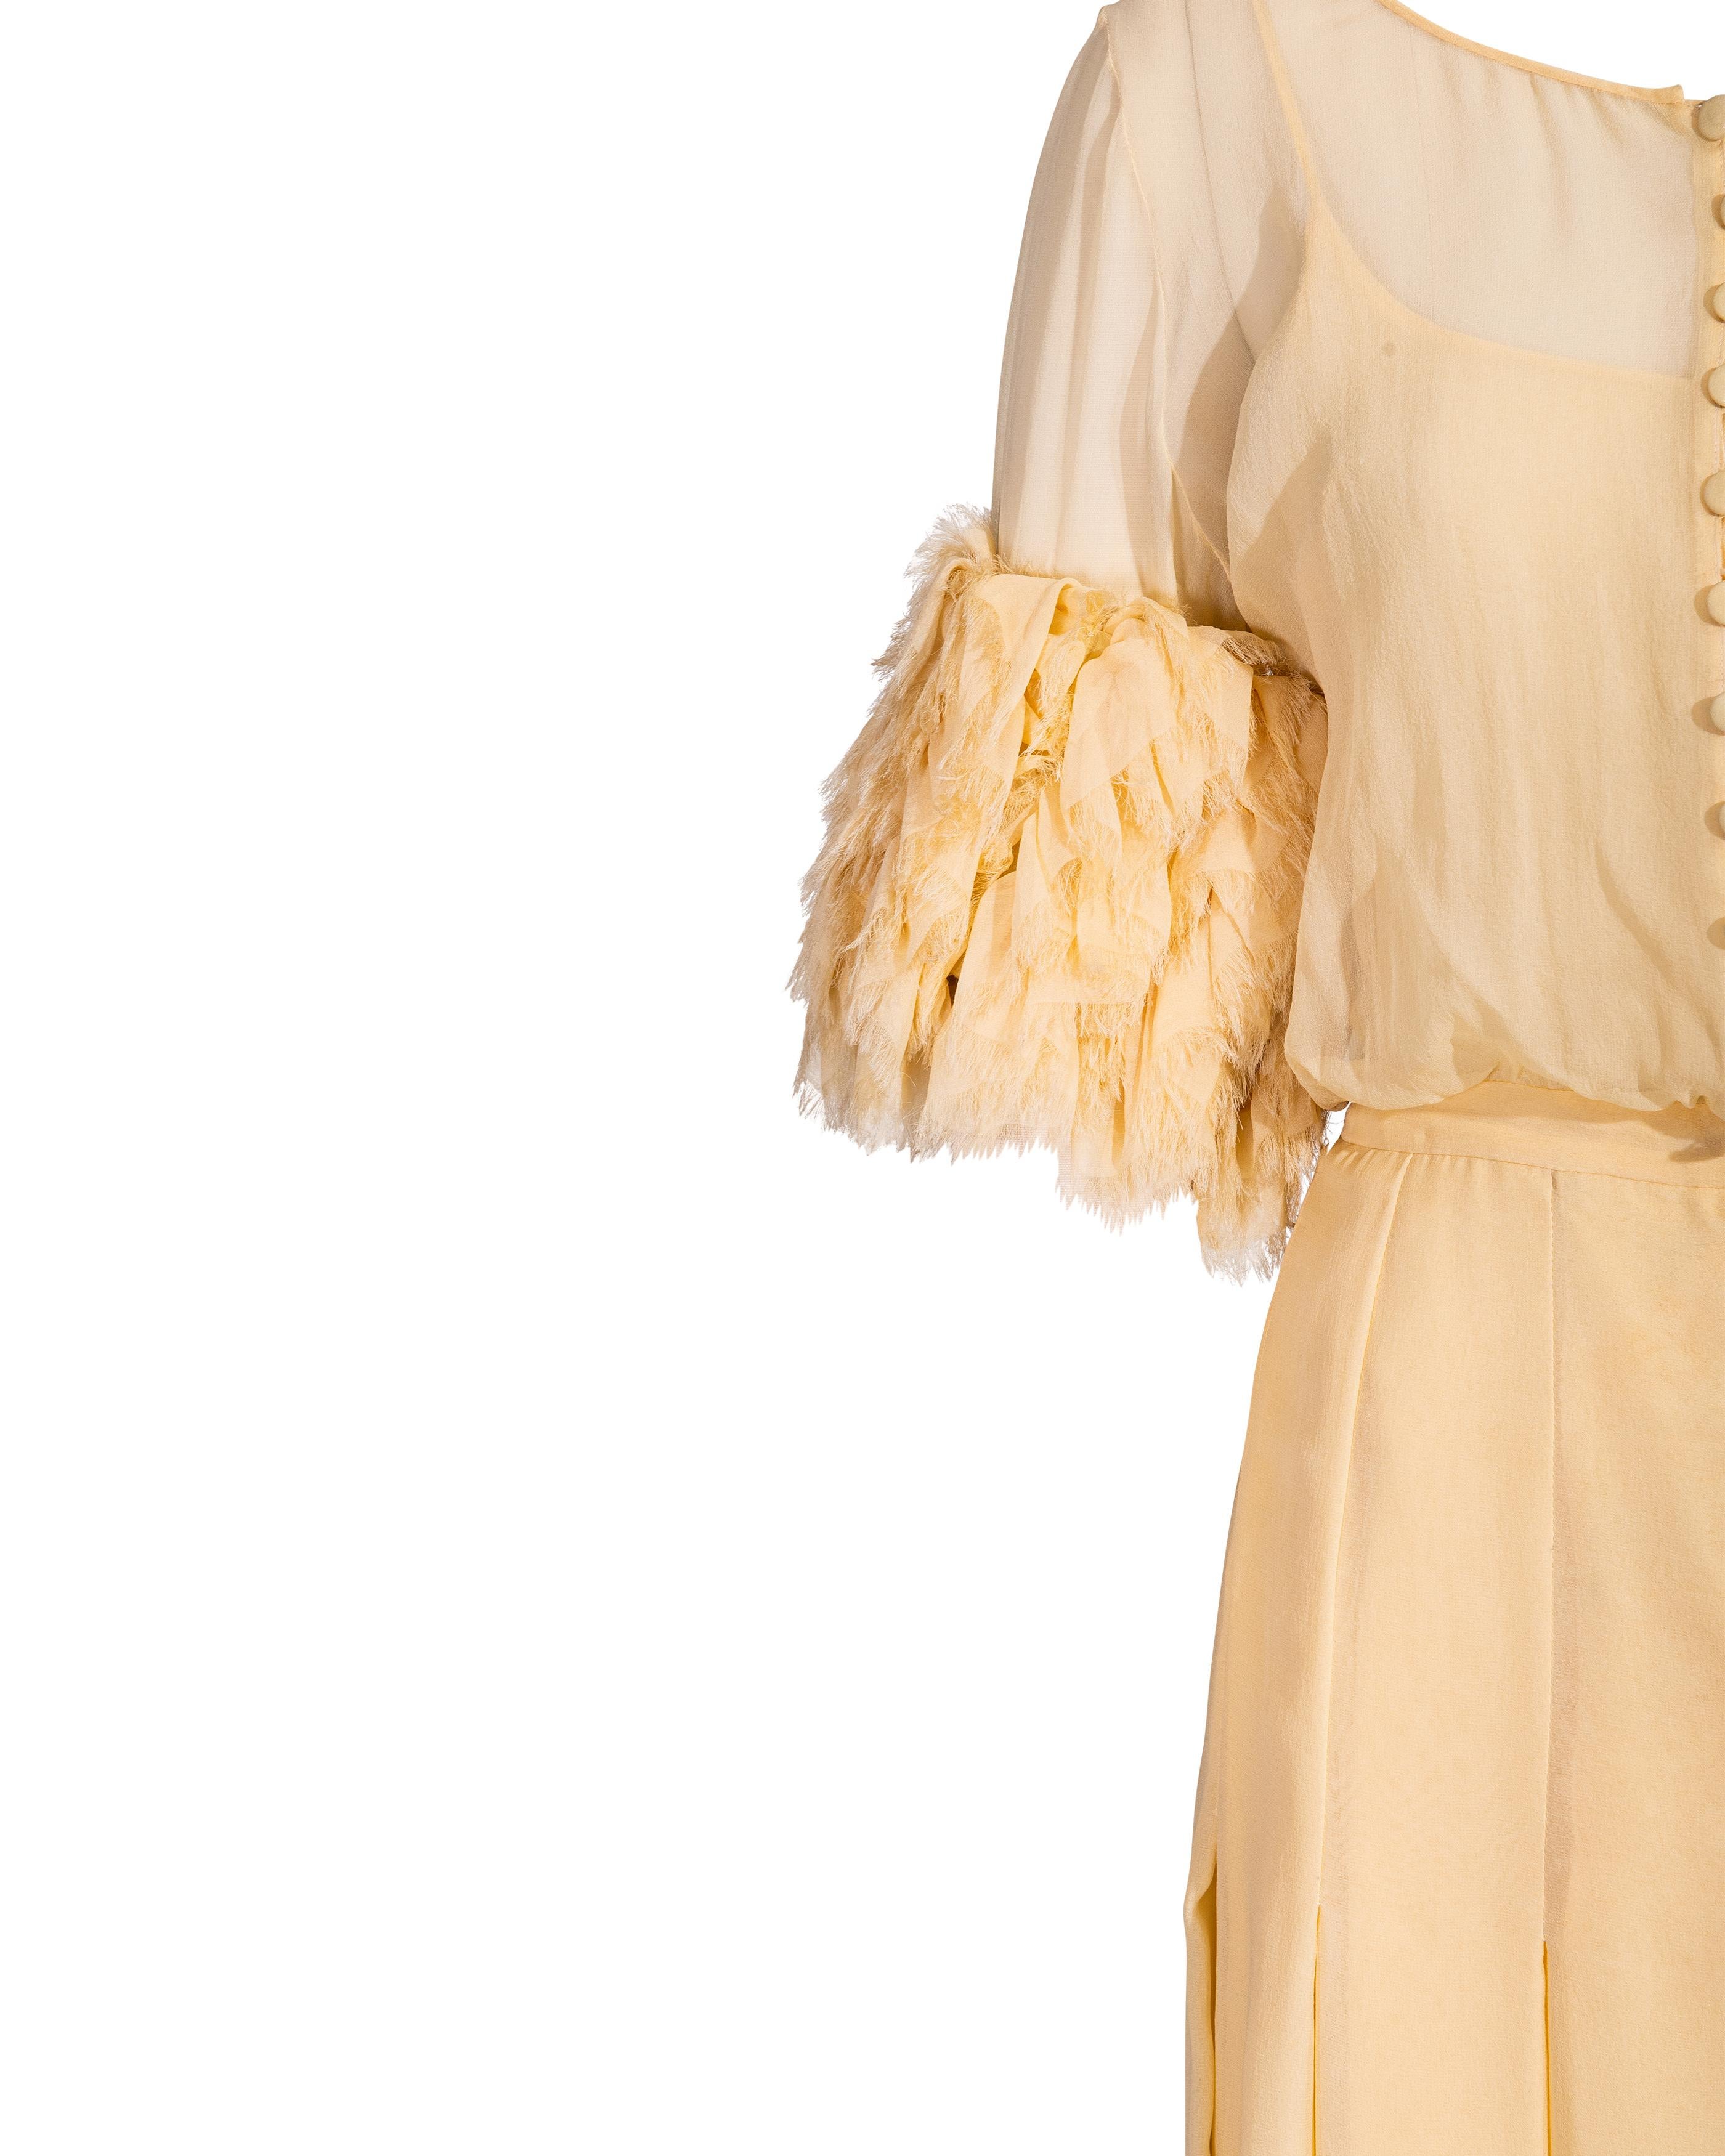 S/S 1984 Chanel by Karl Lagerfeld Butter Yellow Silk Chiffon Gown 3